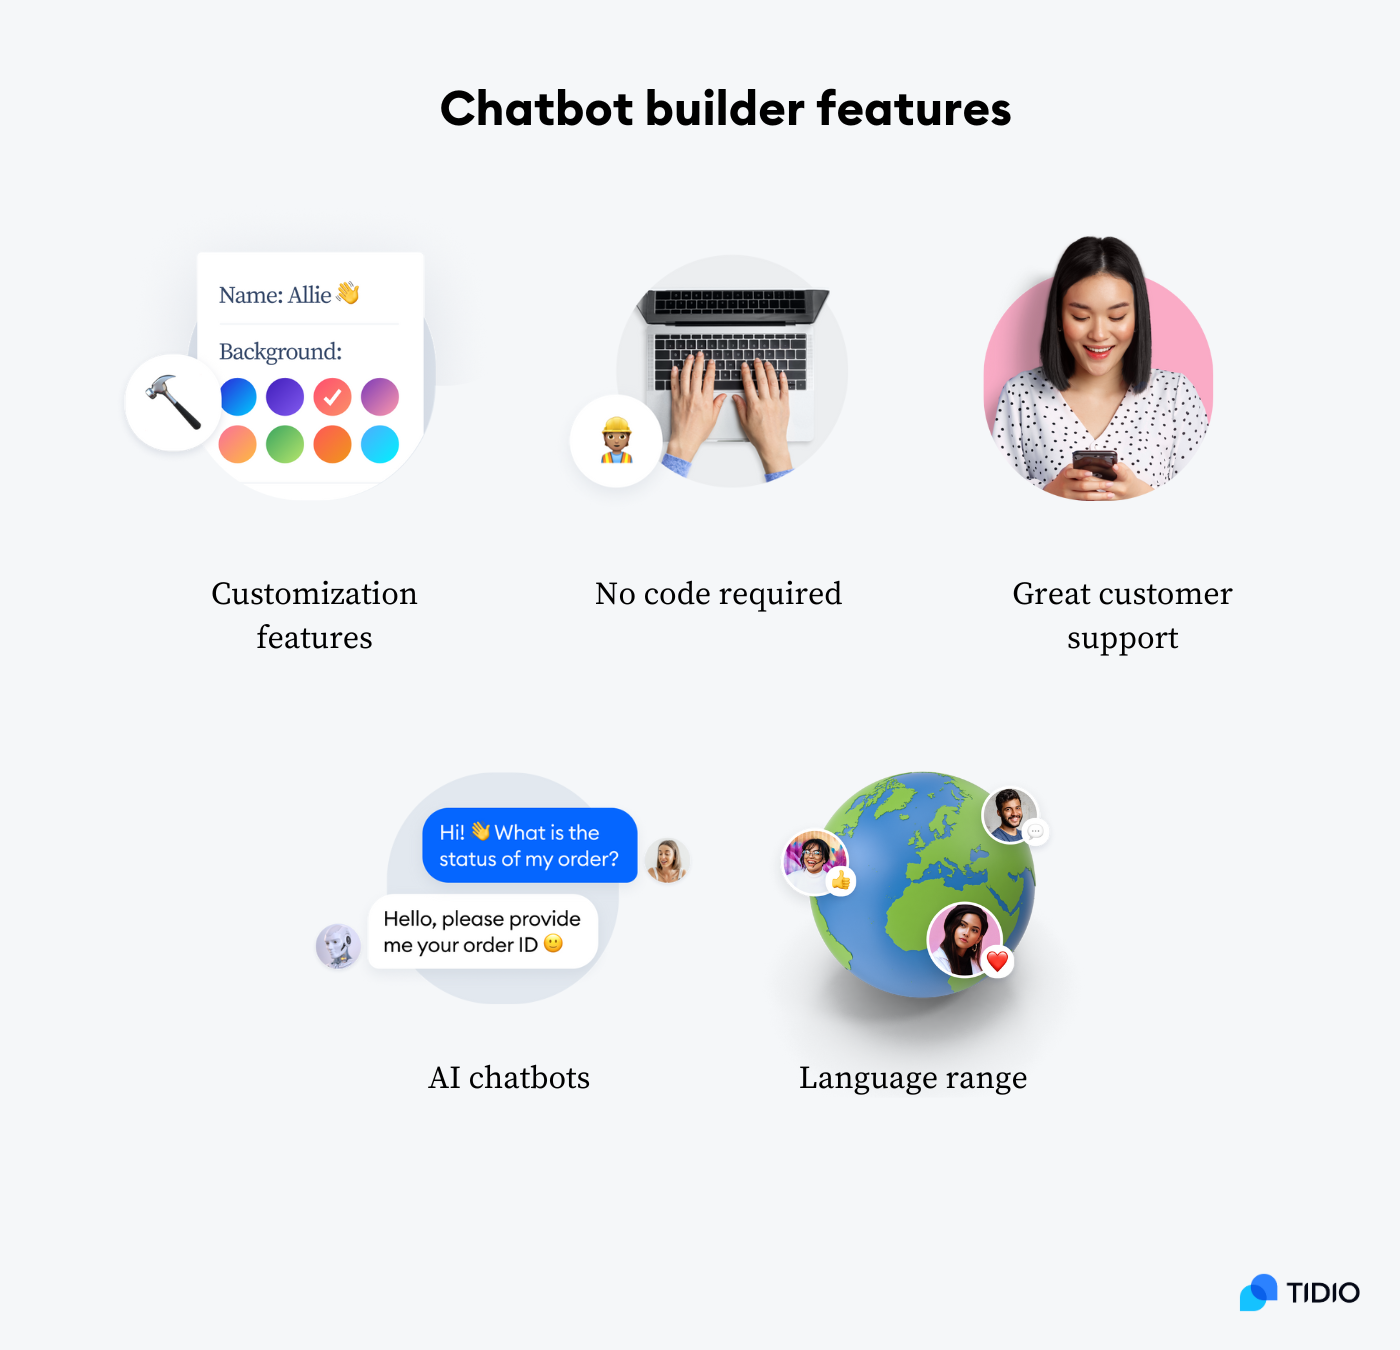 Must have chatbot builder features